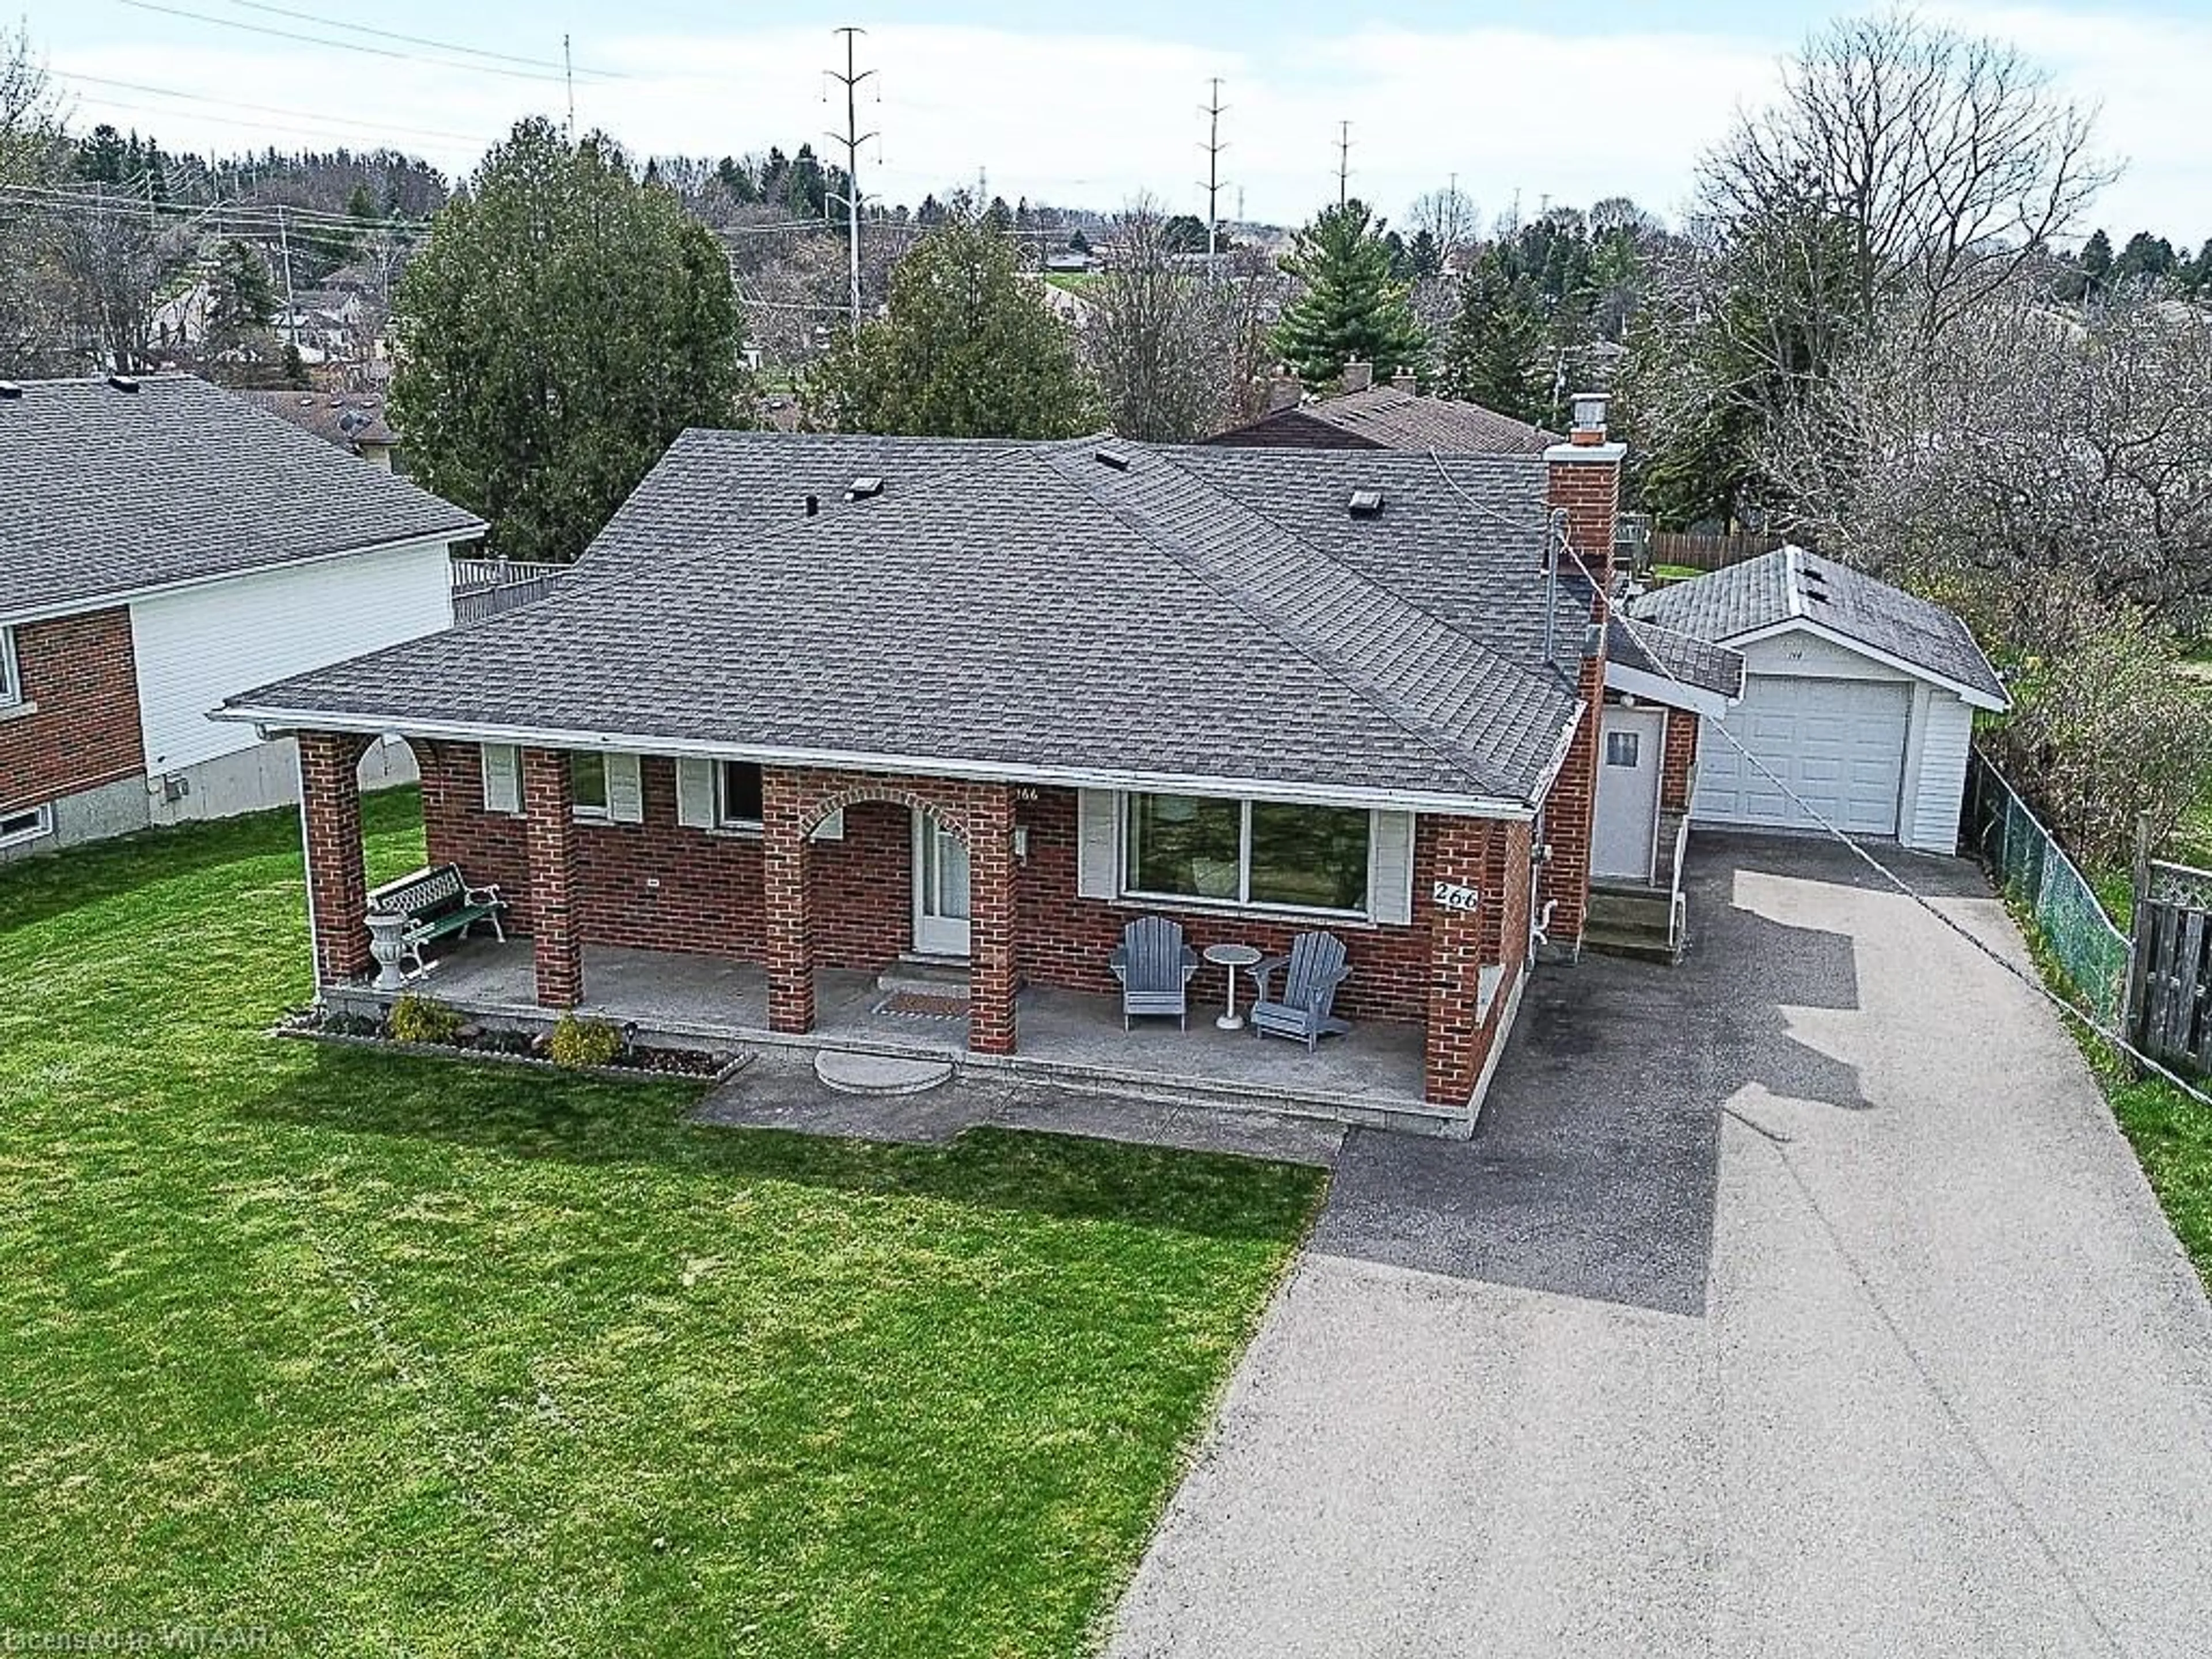 Frontside or backside of a home for 266 Russell St, Woodstock Ontario N4S 2Z4